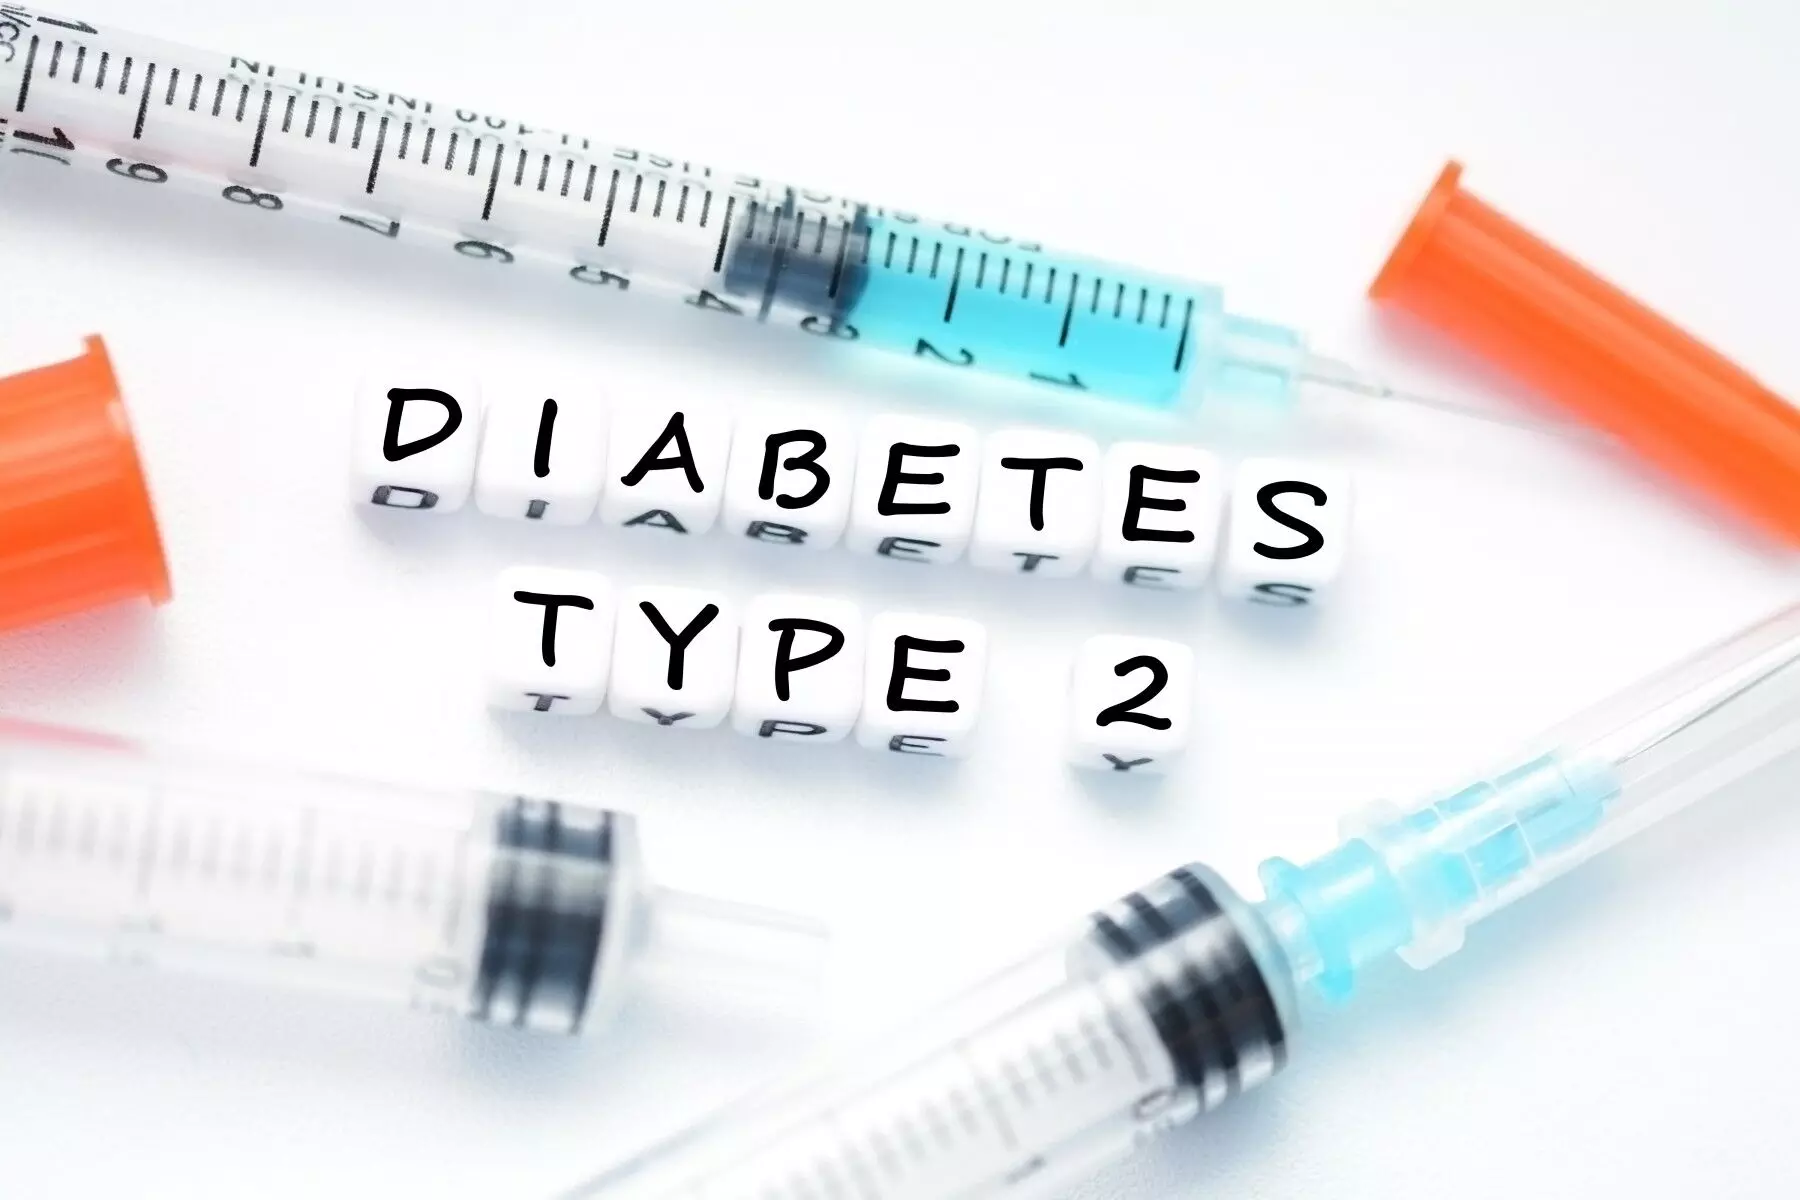 Italian guidelines for treatment of type 2 diabetes released